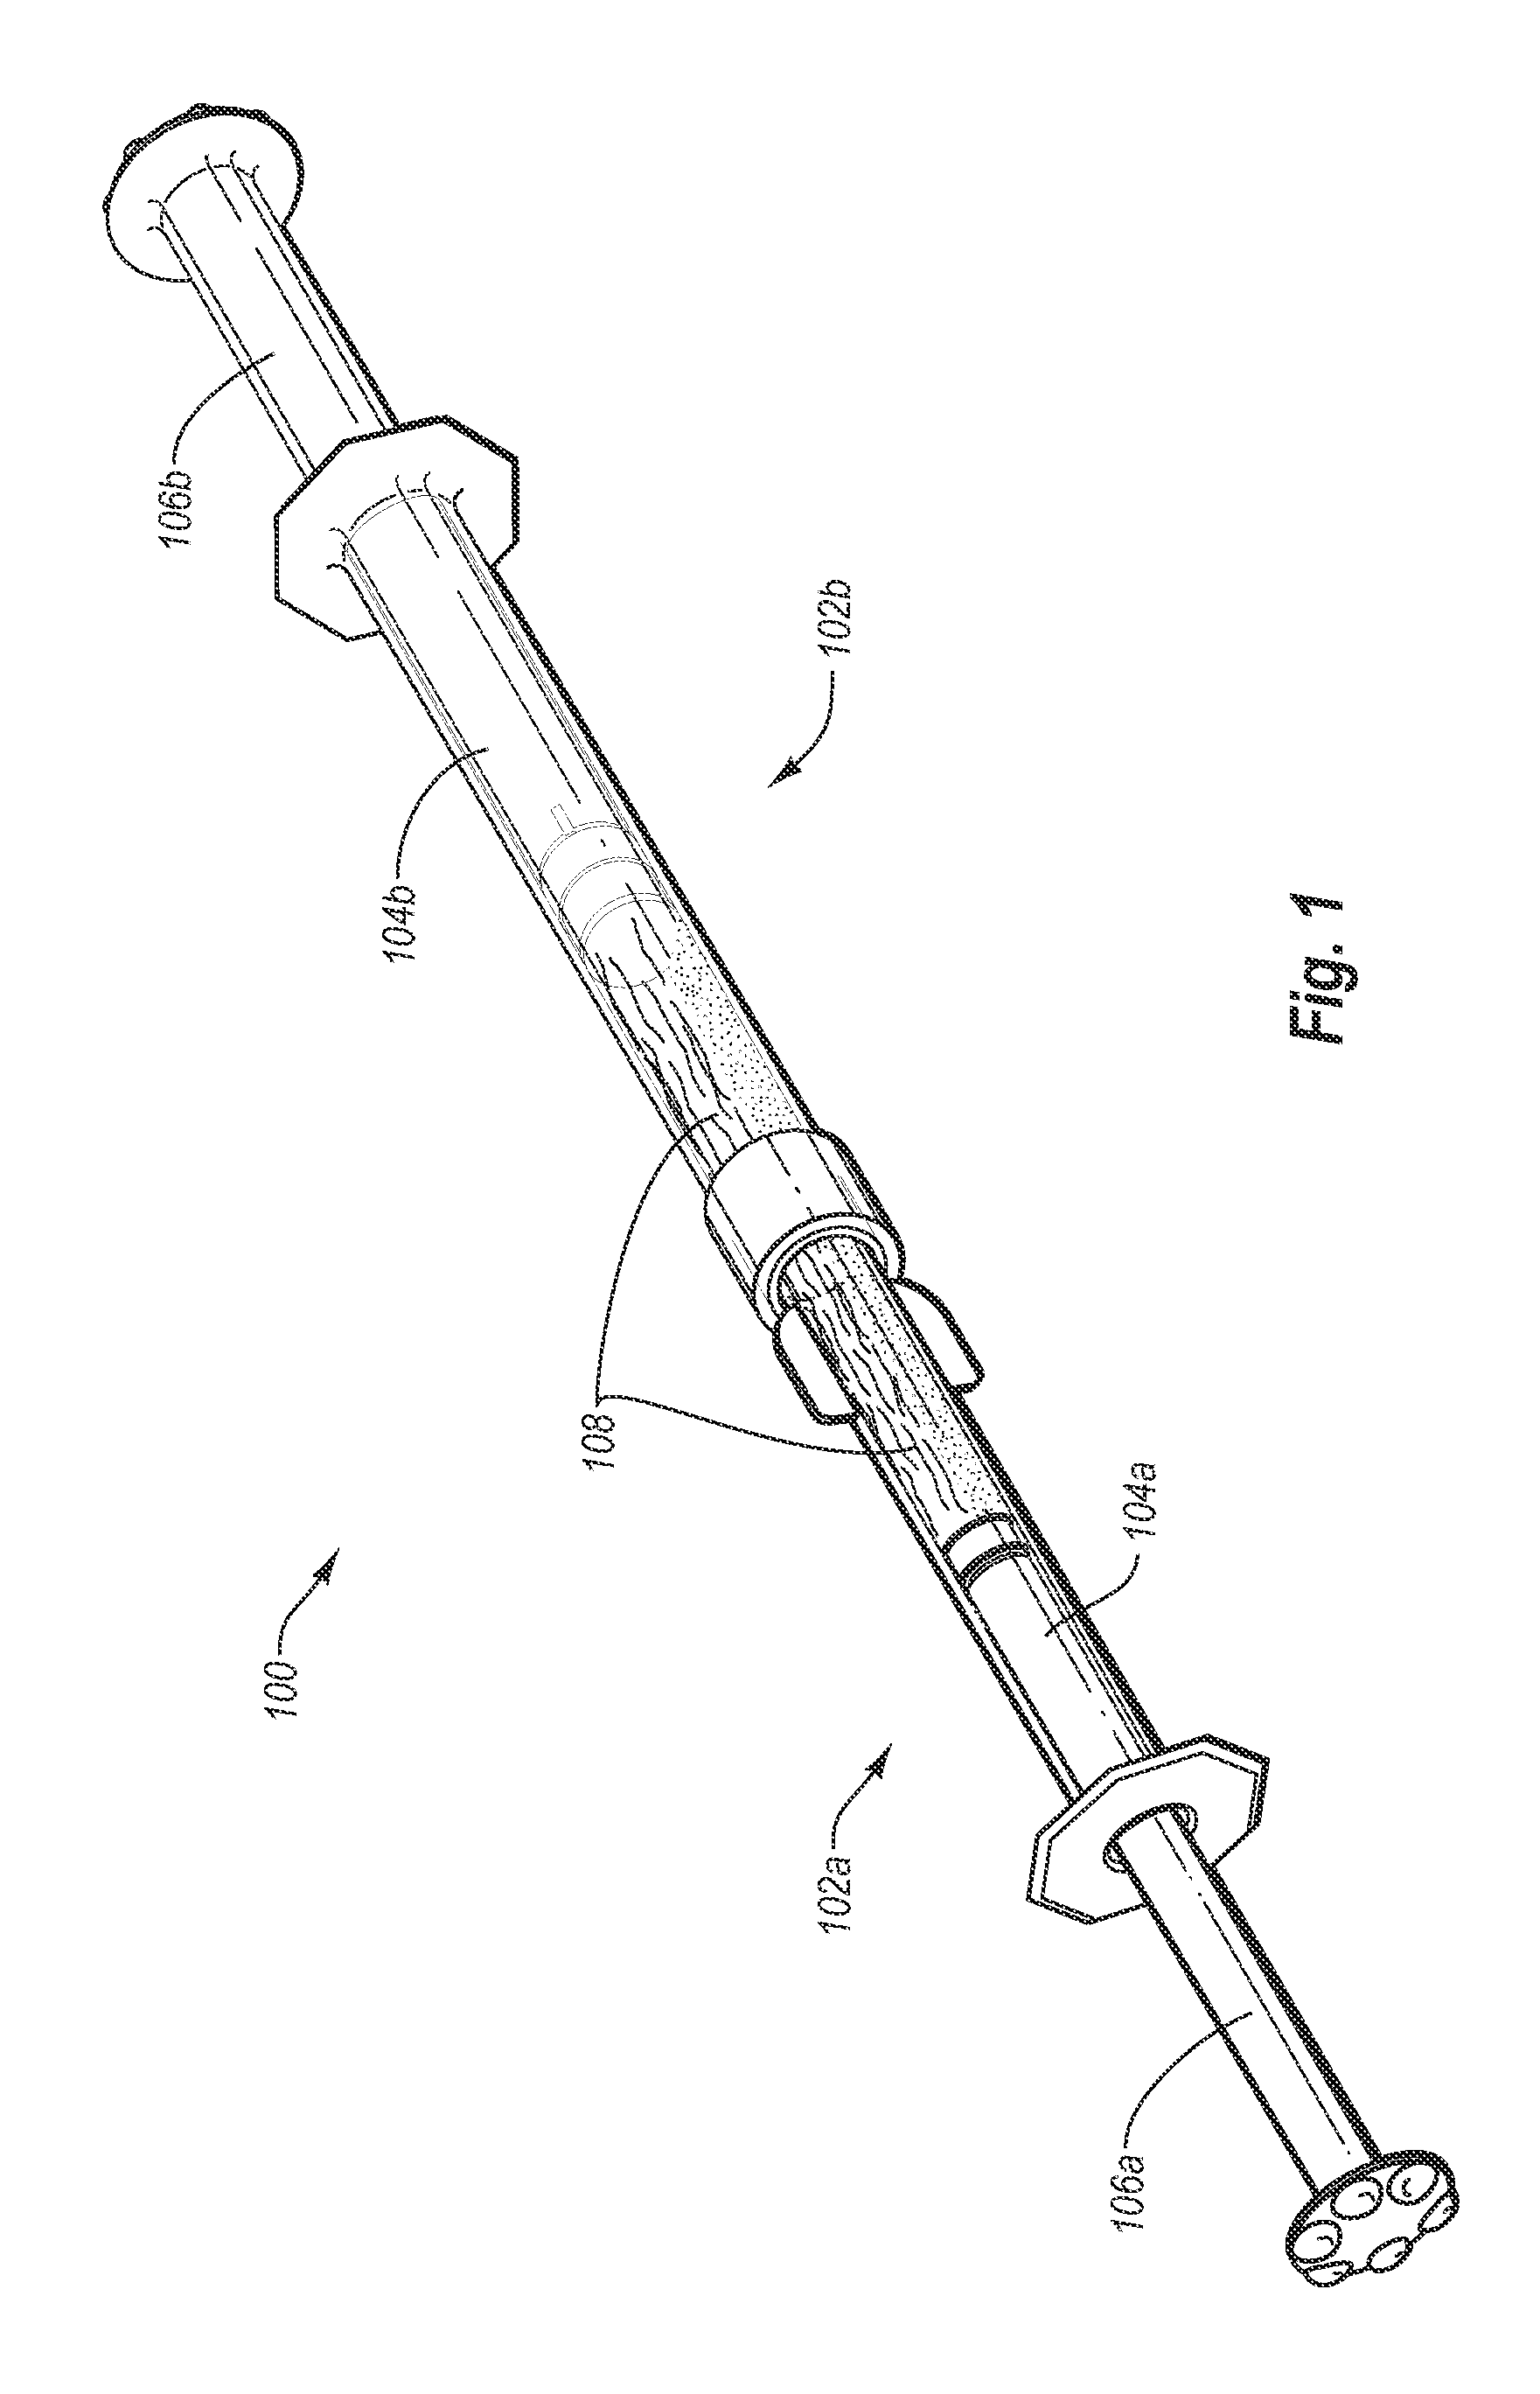 Fluoride varnish compositions including an organo phosphoric acid adhesion promoting agent